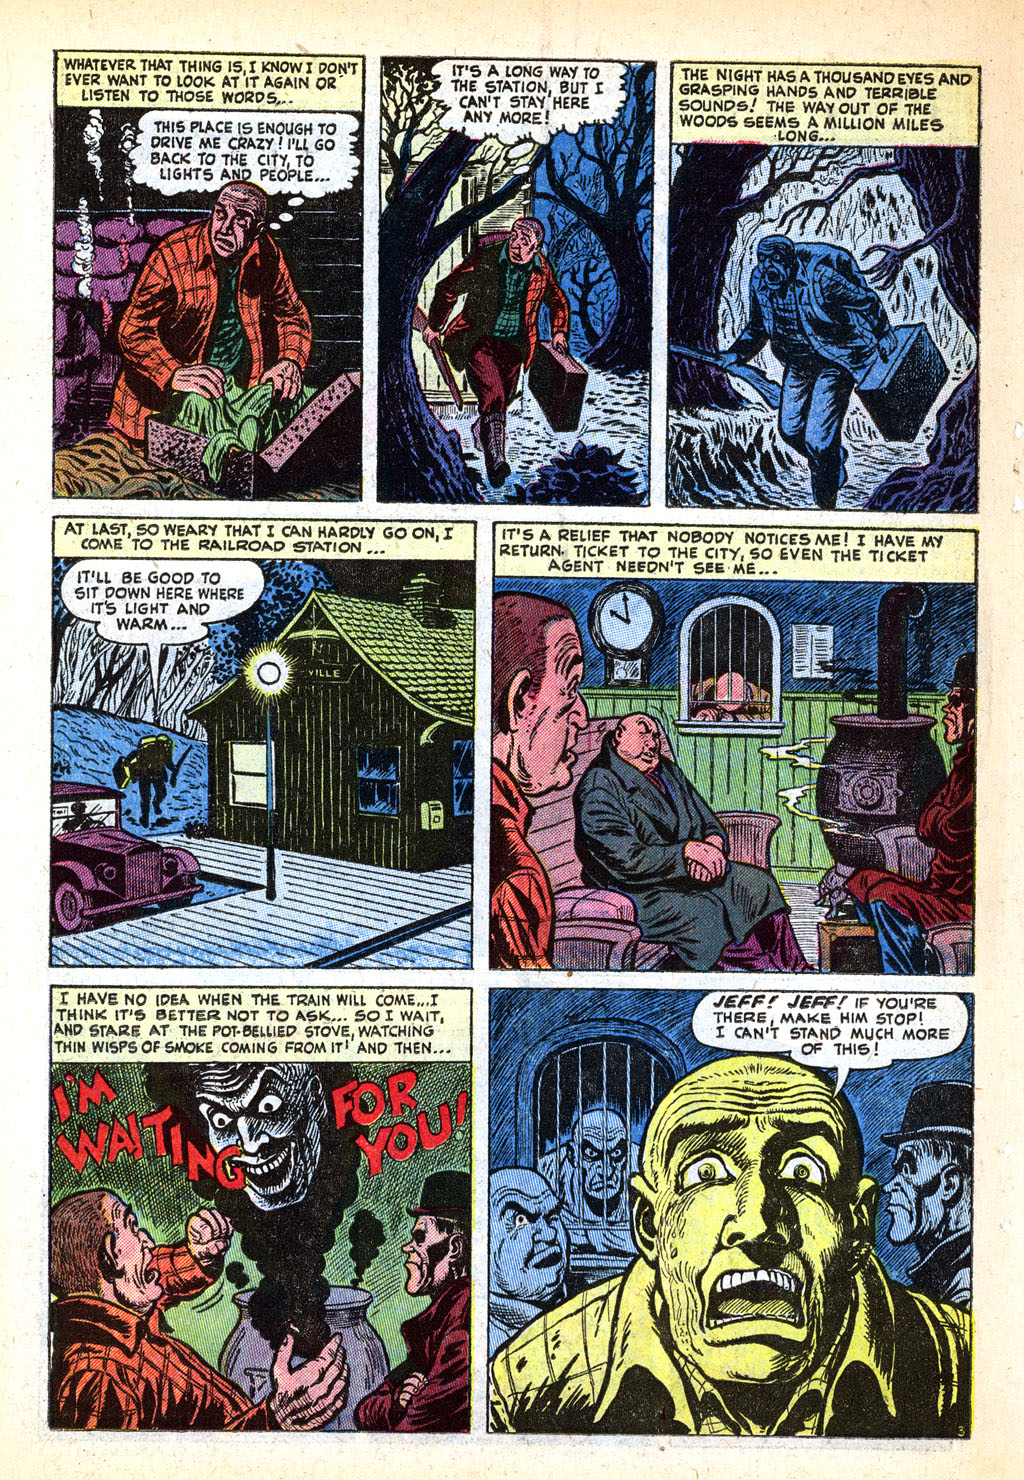 Marvel Tales (1949) 112 Page 21